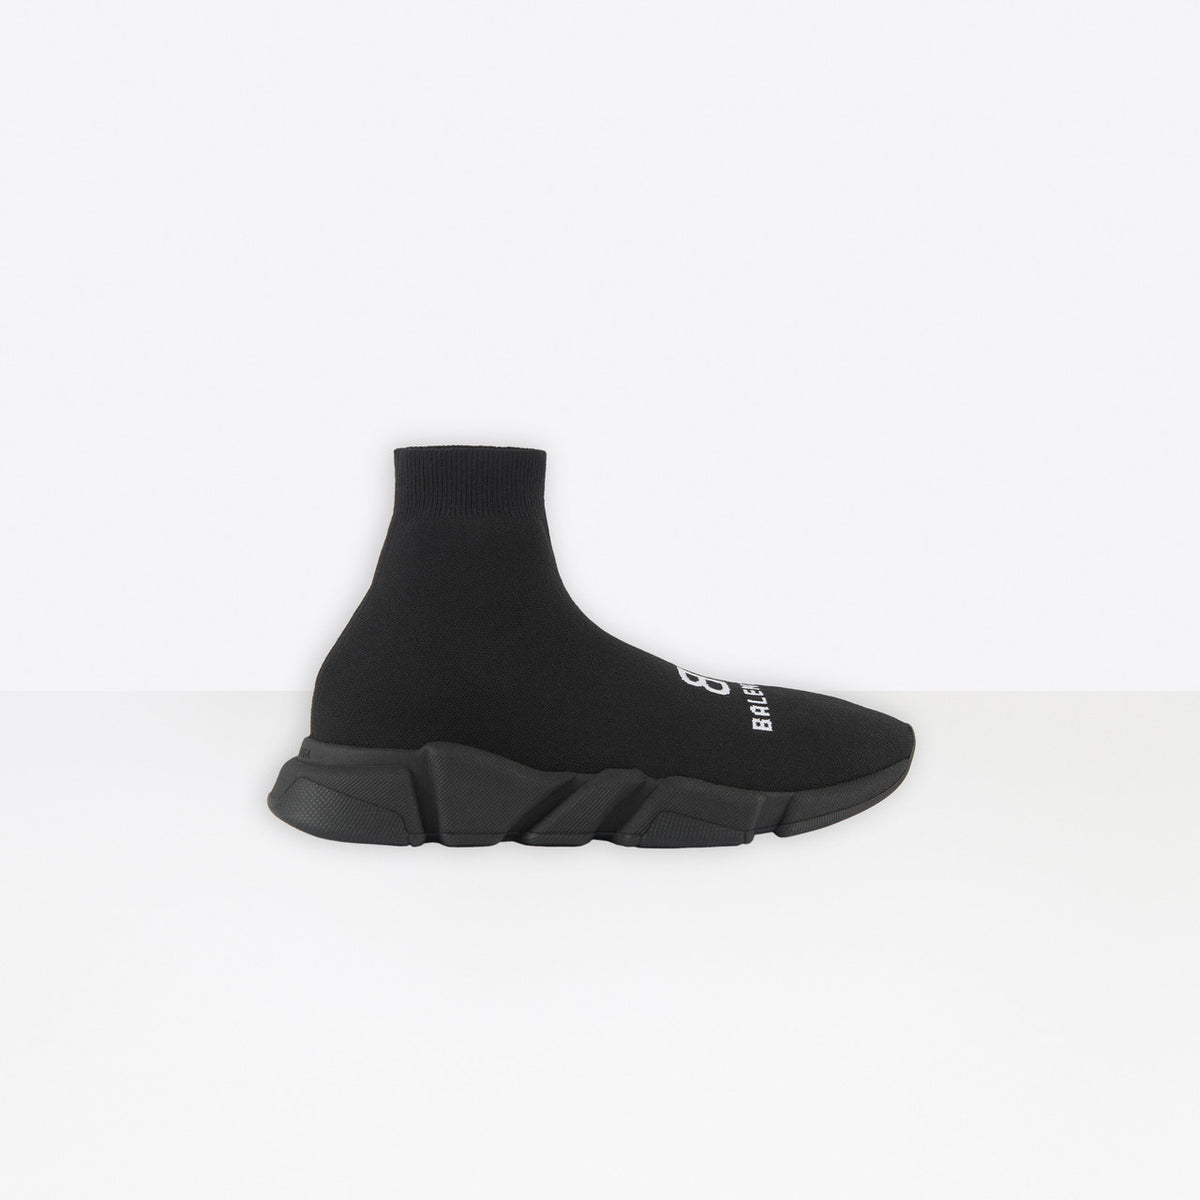 Balenciaga Womens Speed LT Recycle Knit/Sole MO in Black/White/Black